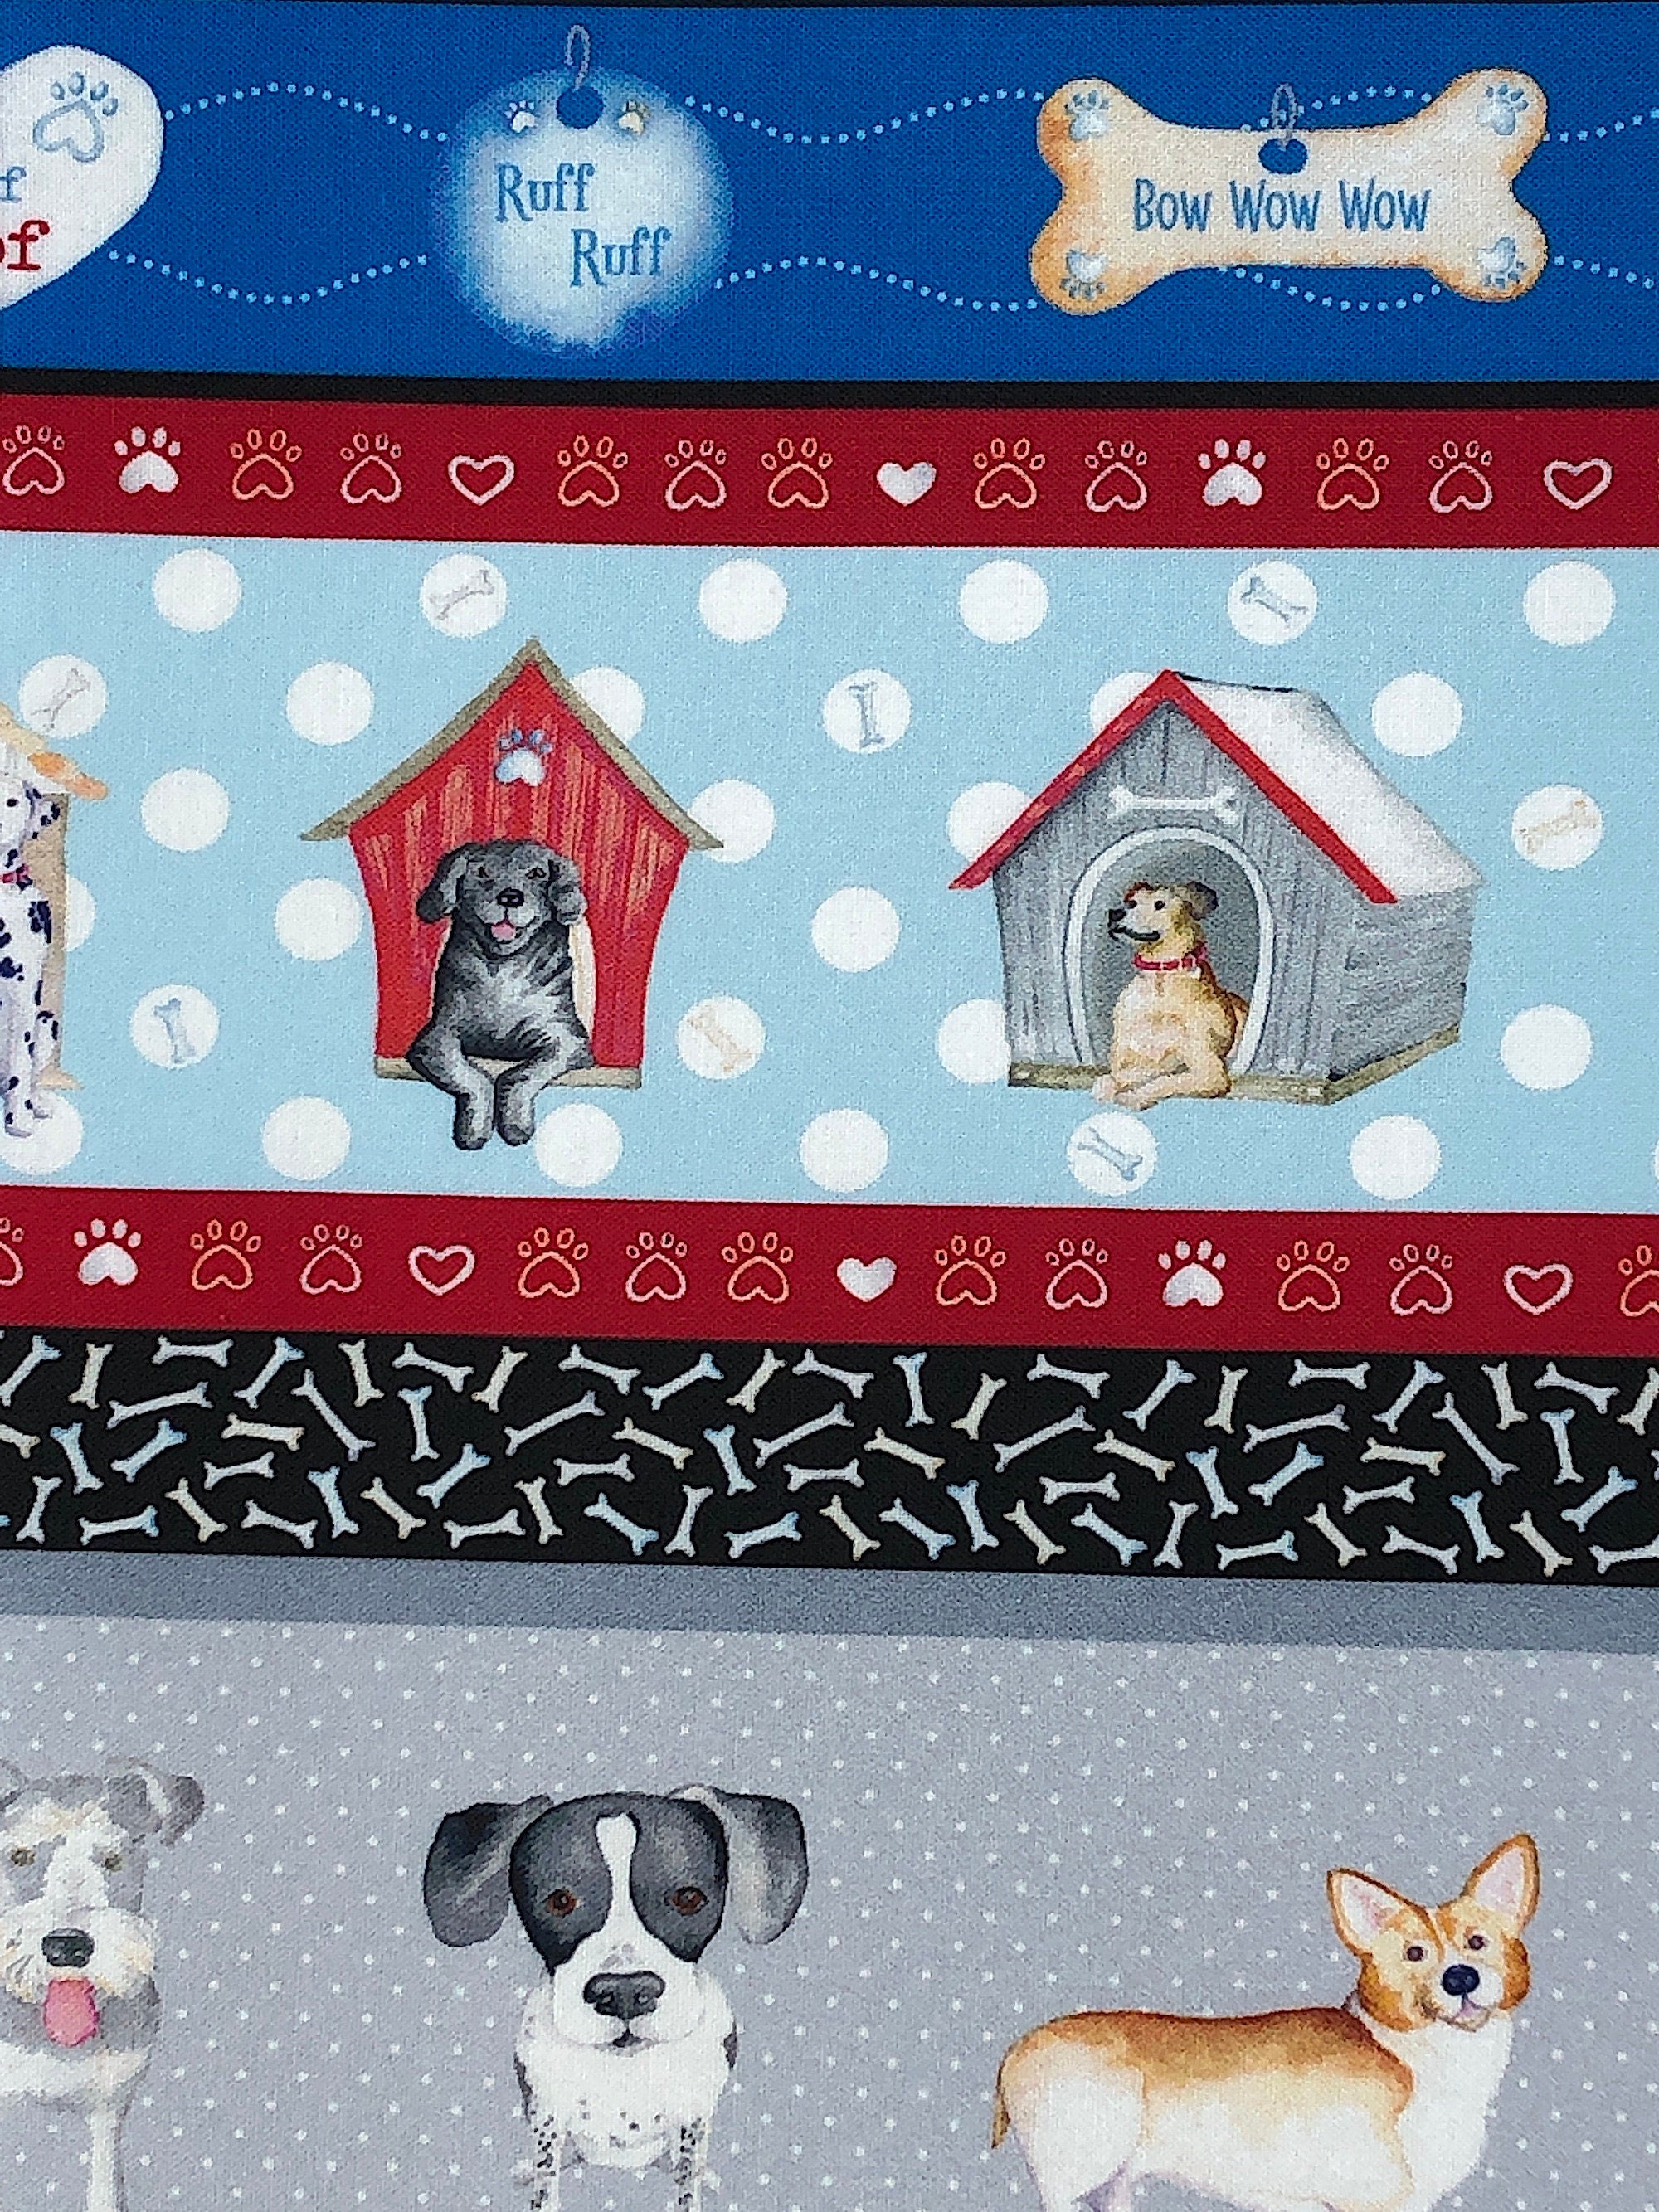 Close up of dogs in dog houses and stripes of paw prints and dog bones.